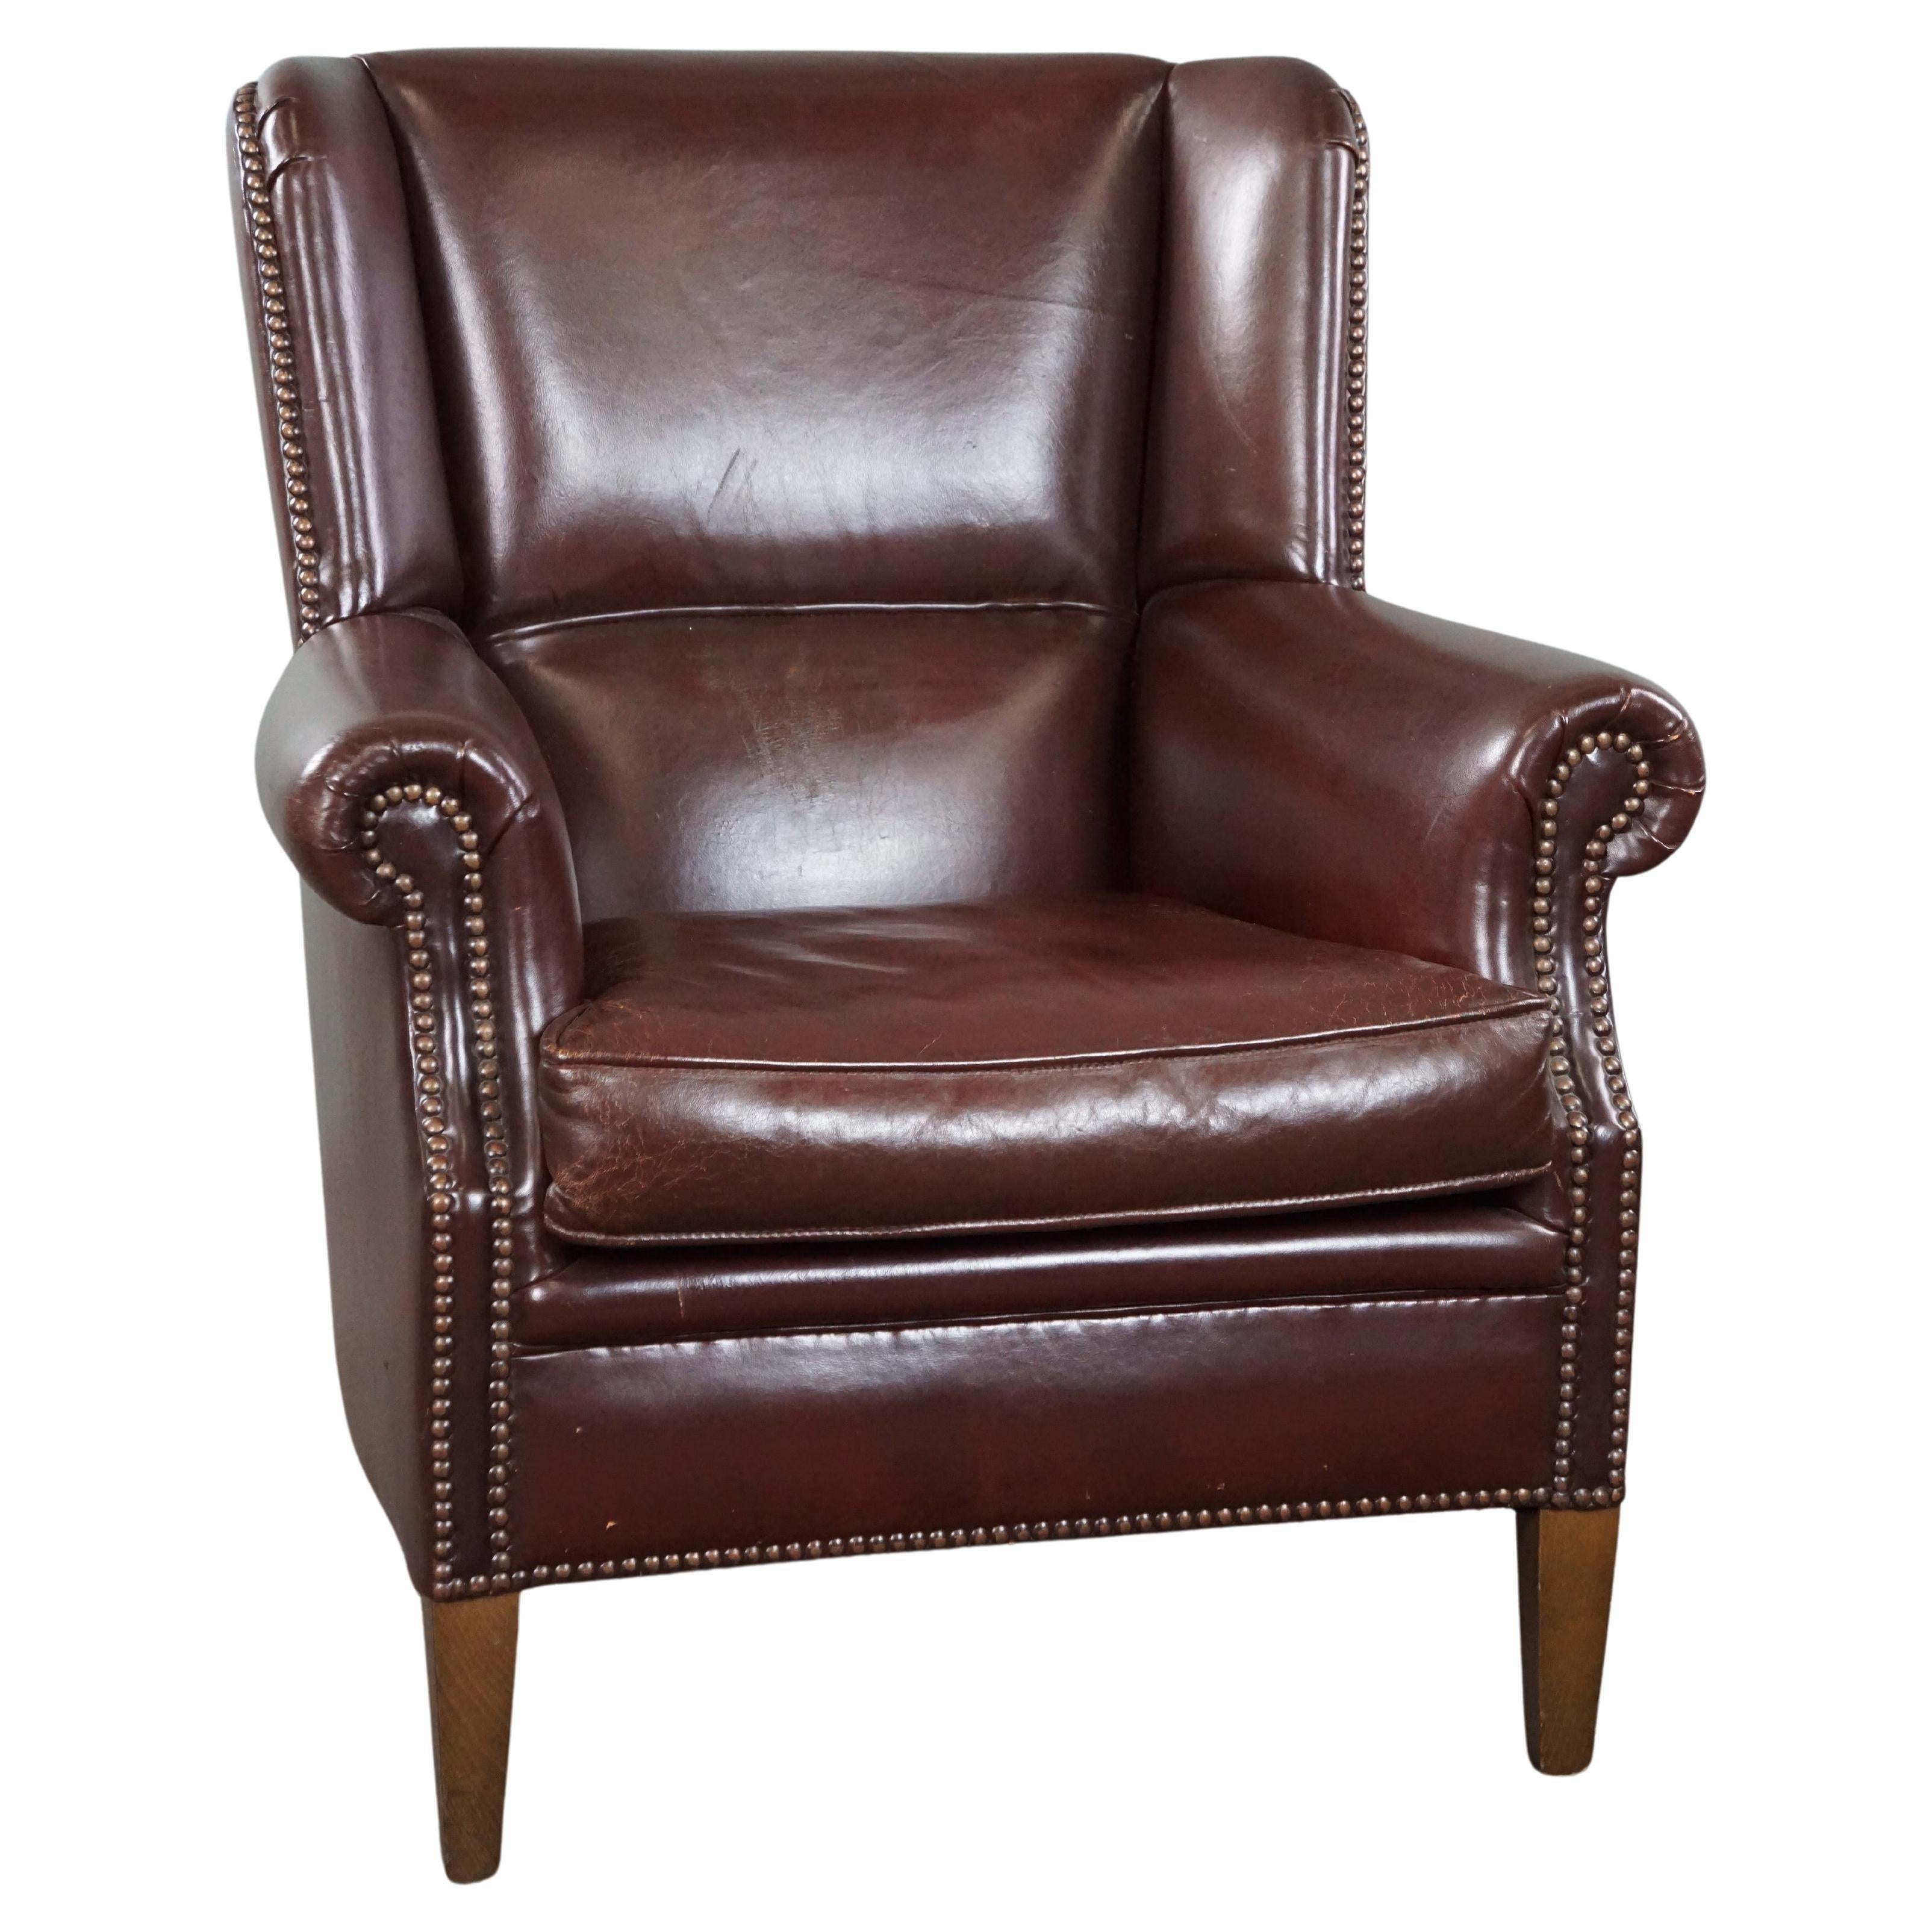 Comfortable sheep leather armchair in a beautiful warm color